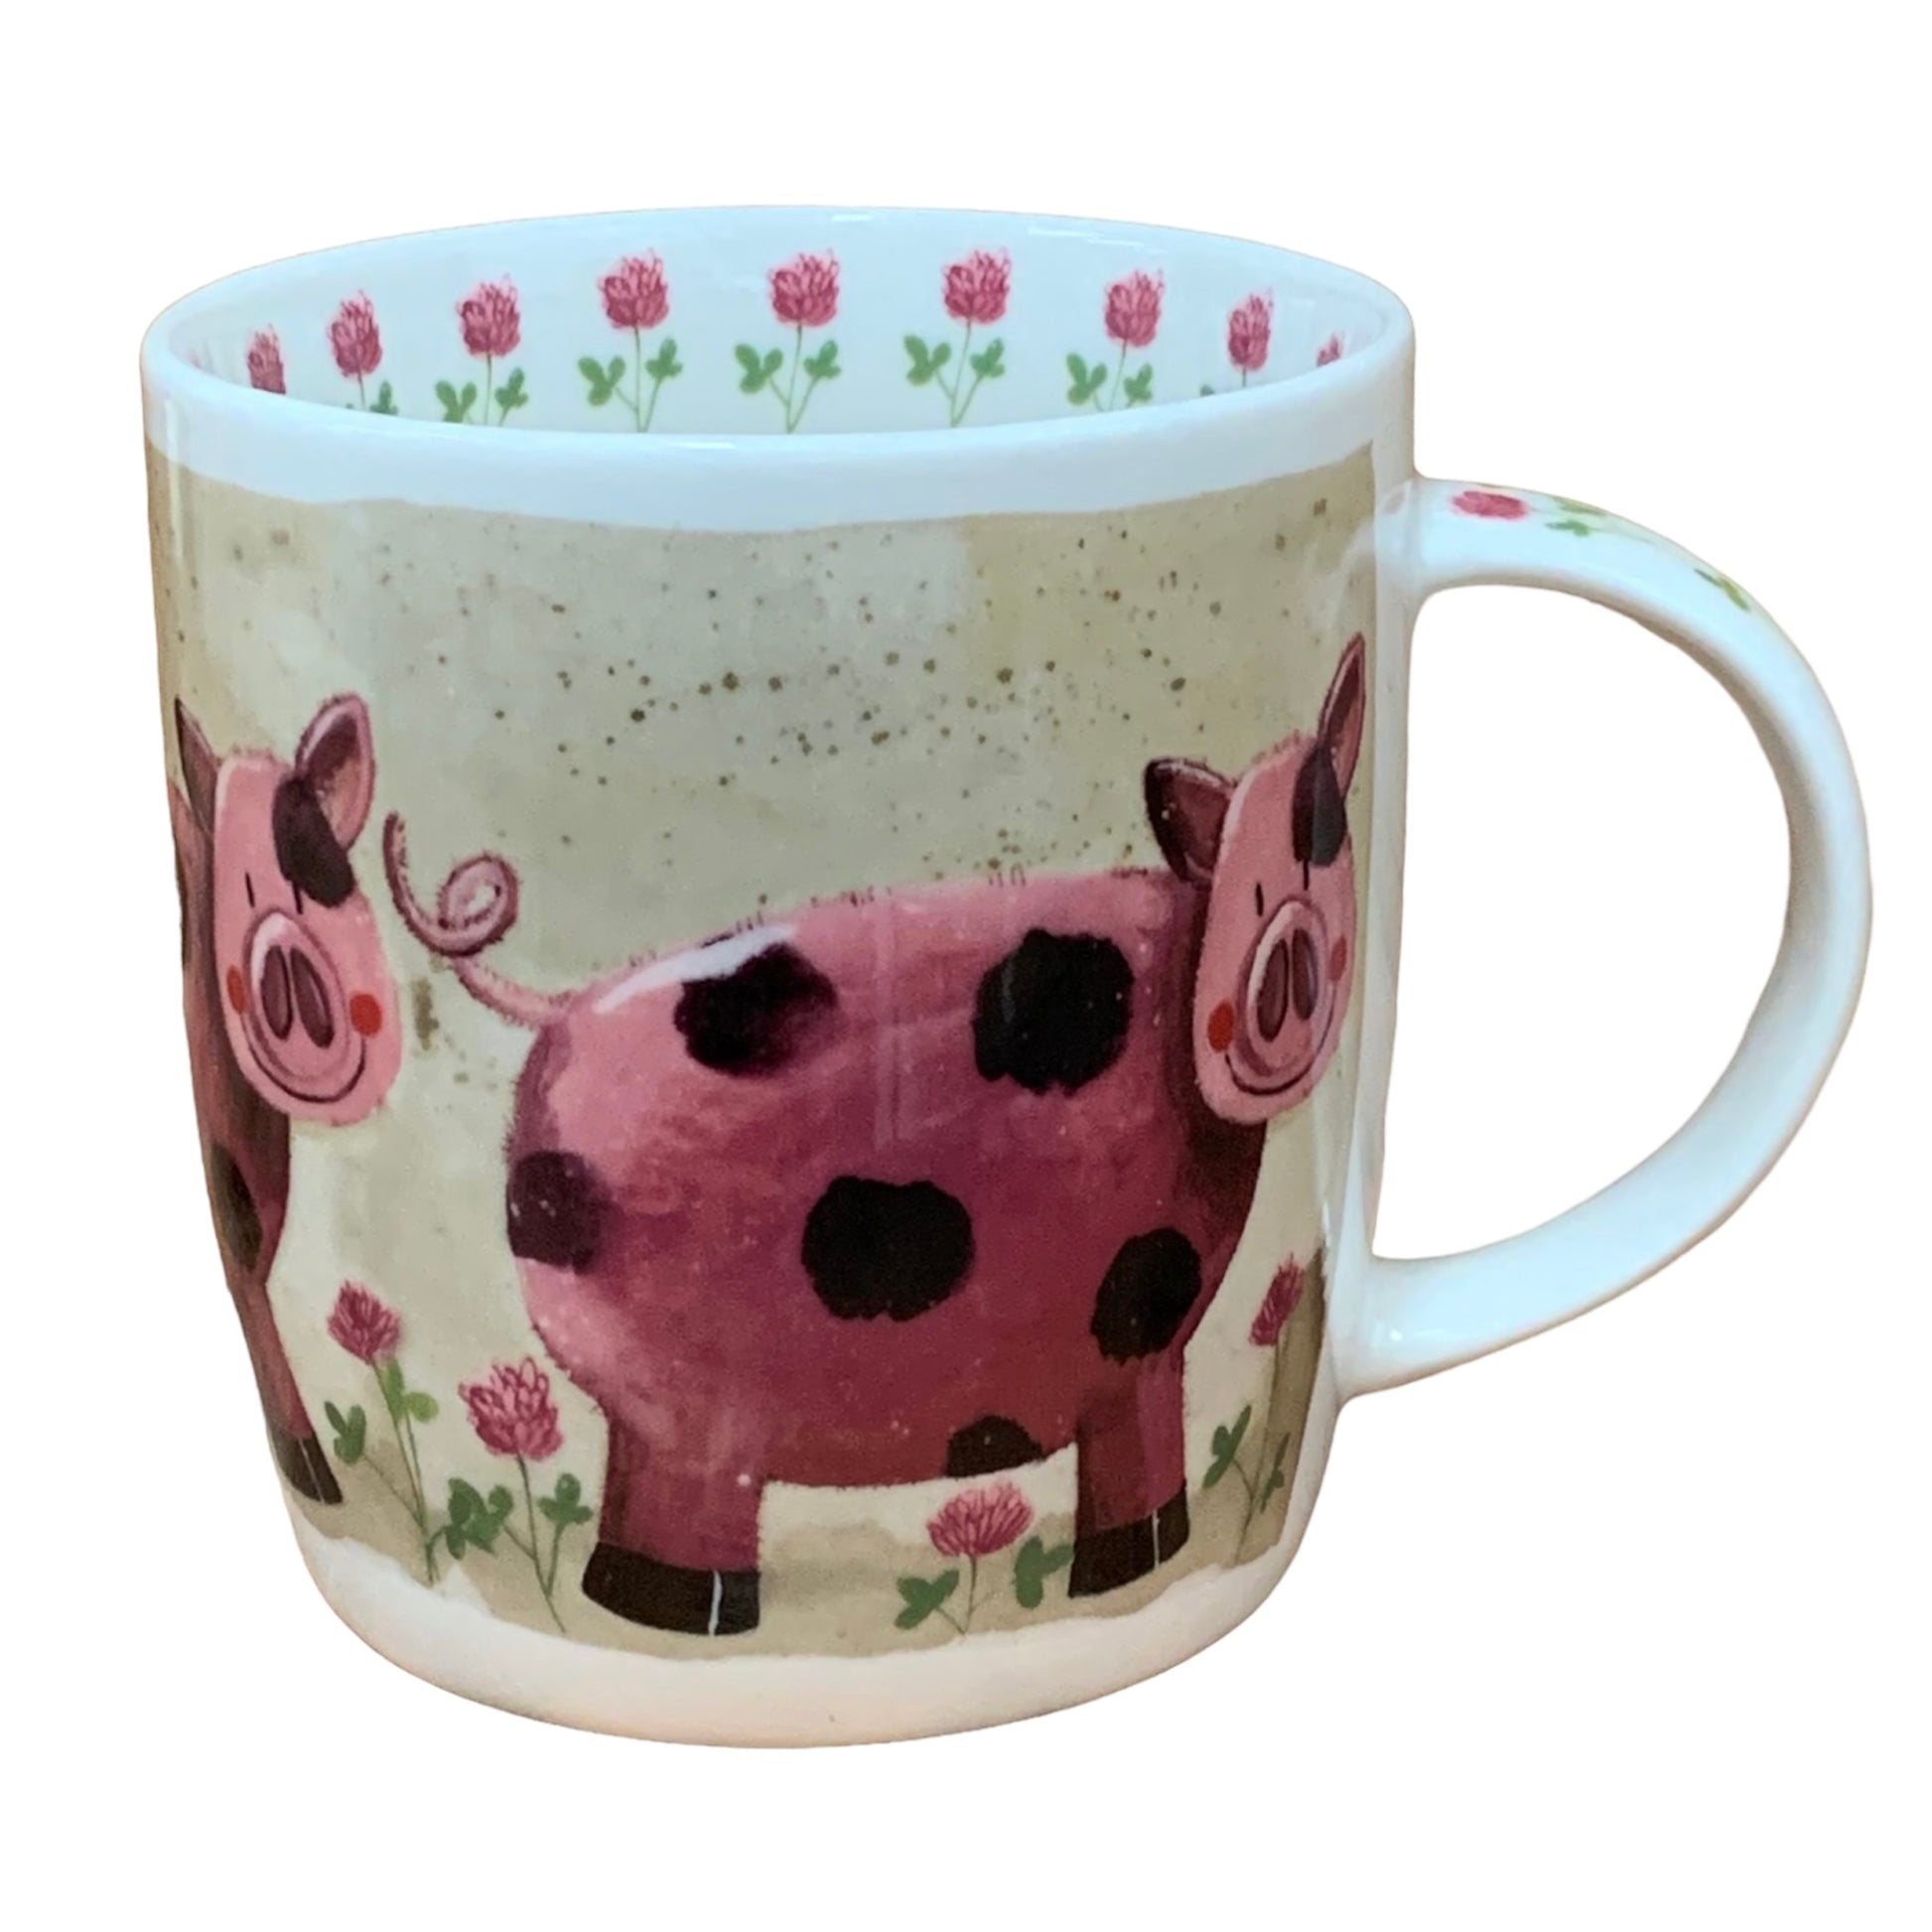 This Alex Clark mug is illustrated with a pig called Pearl who is standing in her meadow of flowers. This mug also features pink flower illustrations around the inside rim & down the handle.